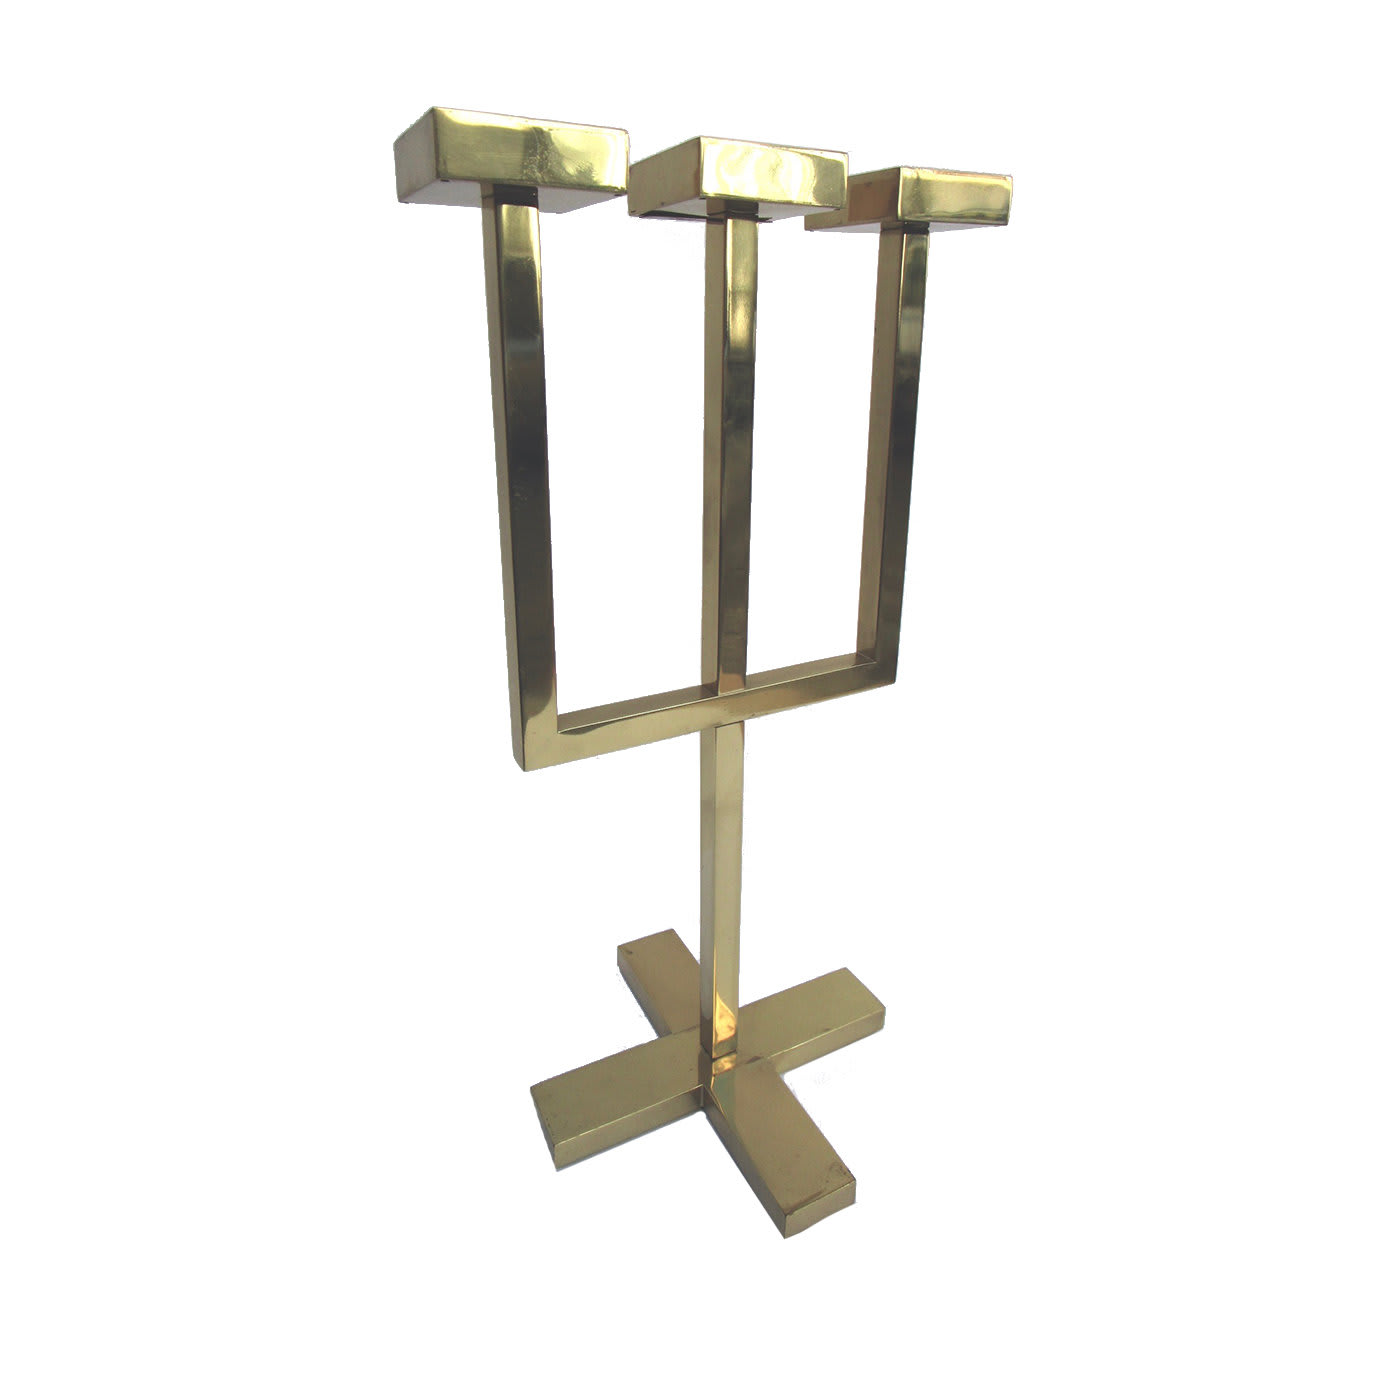 Forch Three-Candle Holder - Nicola Falcone